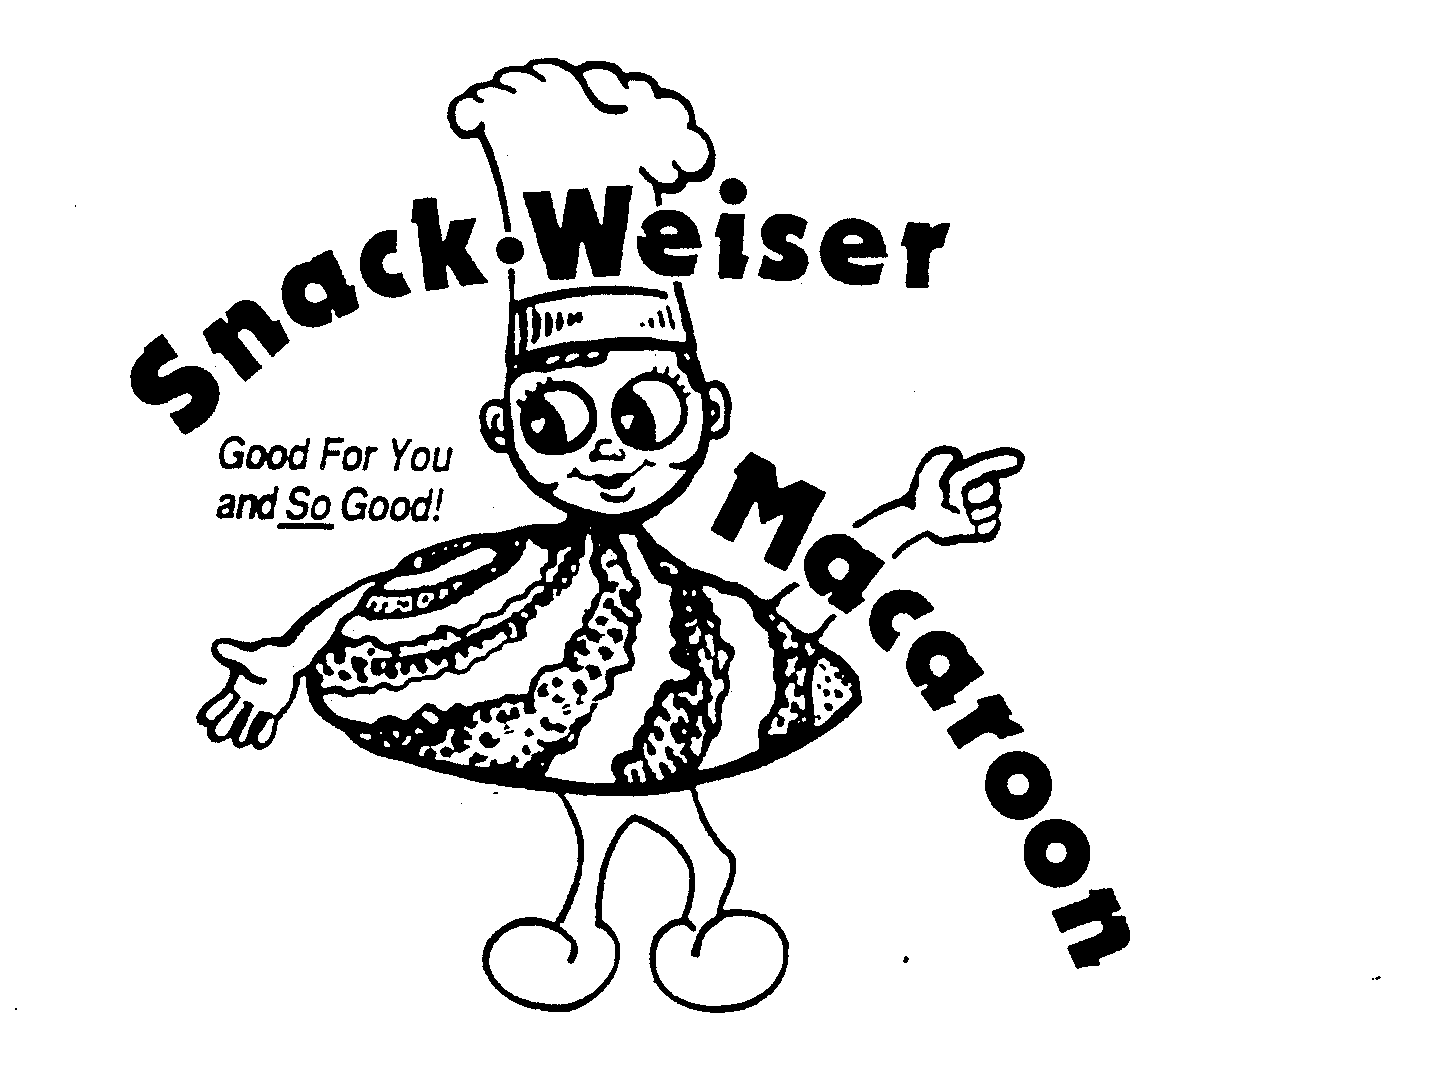  SNACK WEISER MACAROON GOOD FOR YOU AND SO GOOD